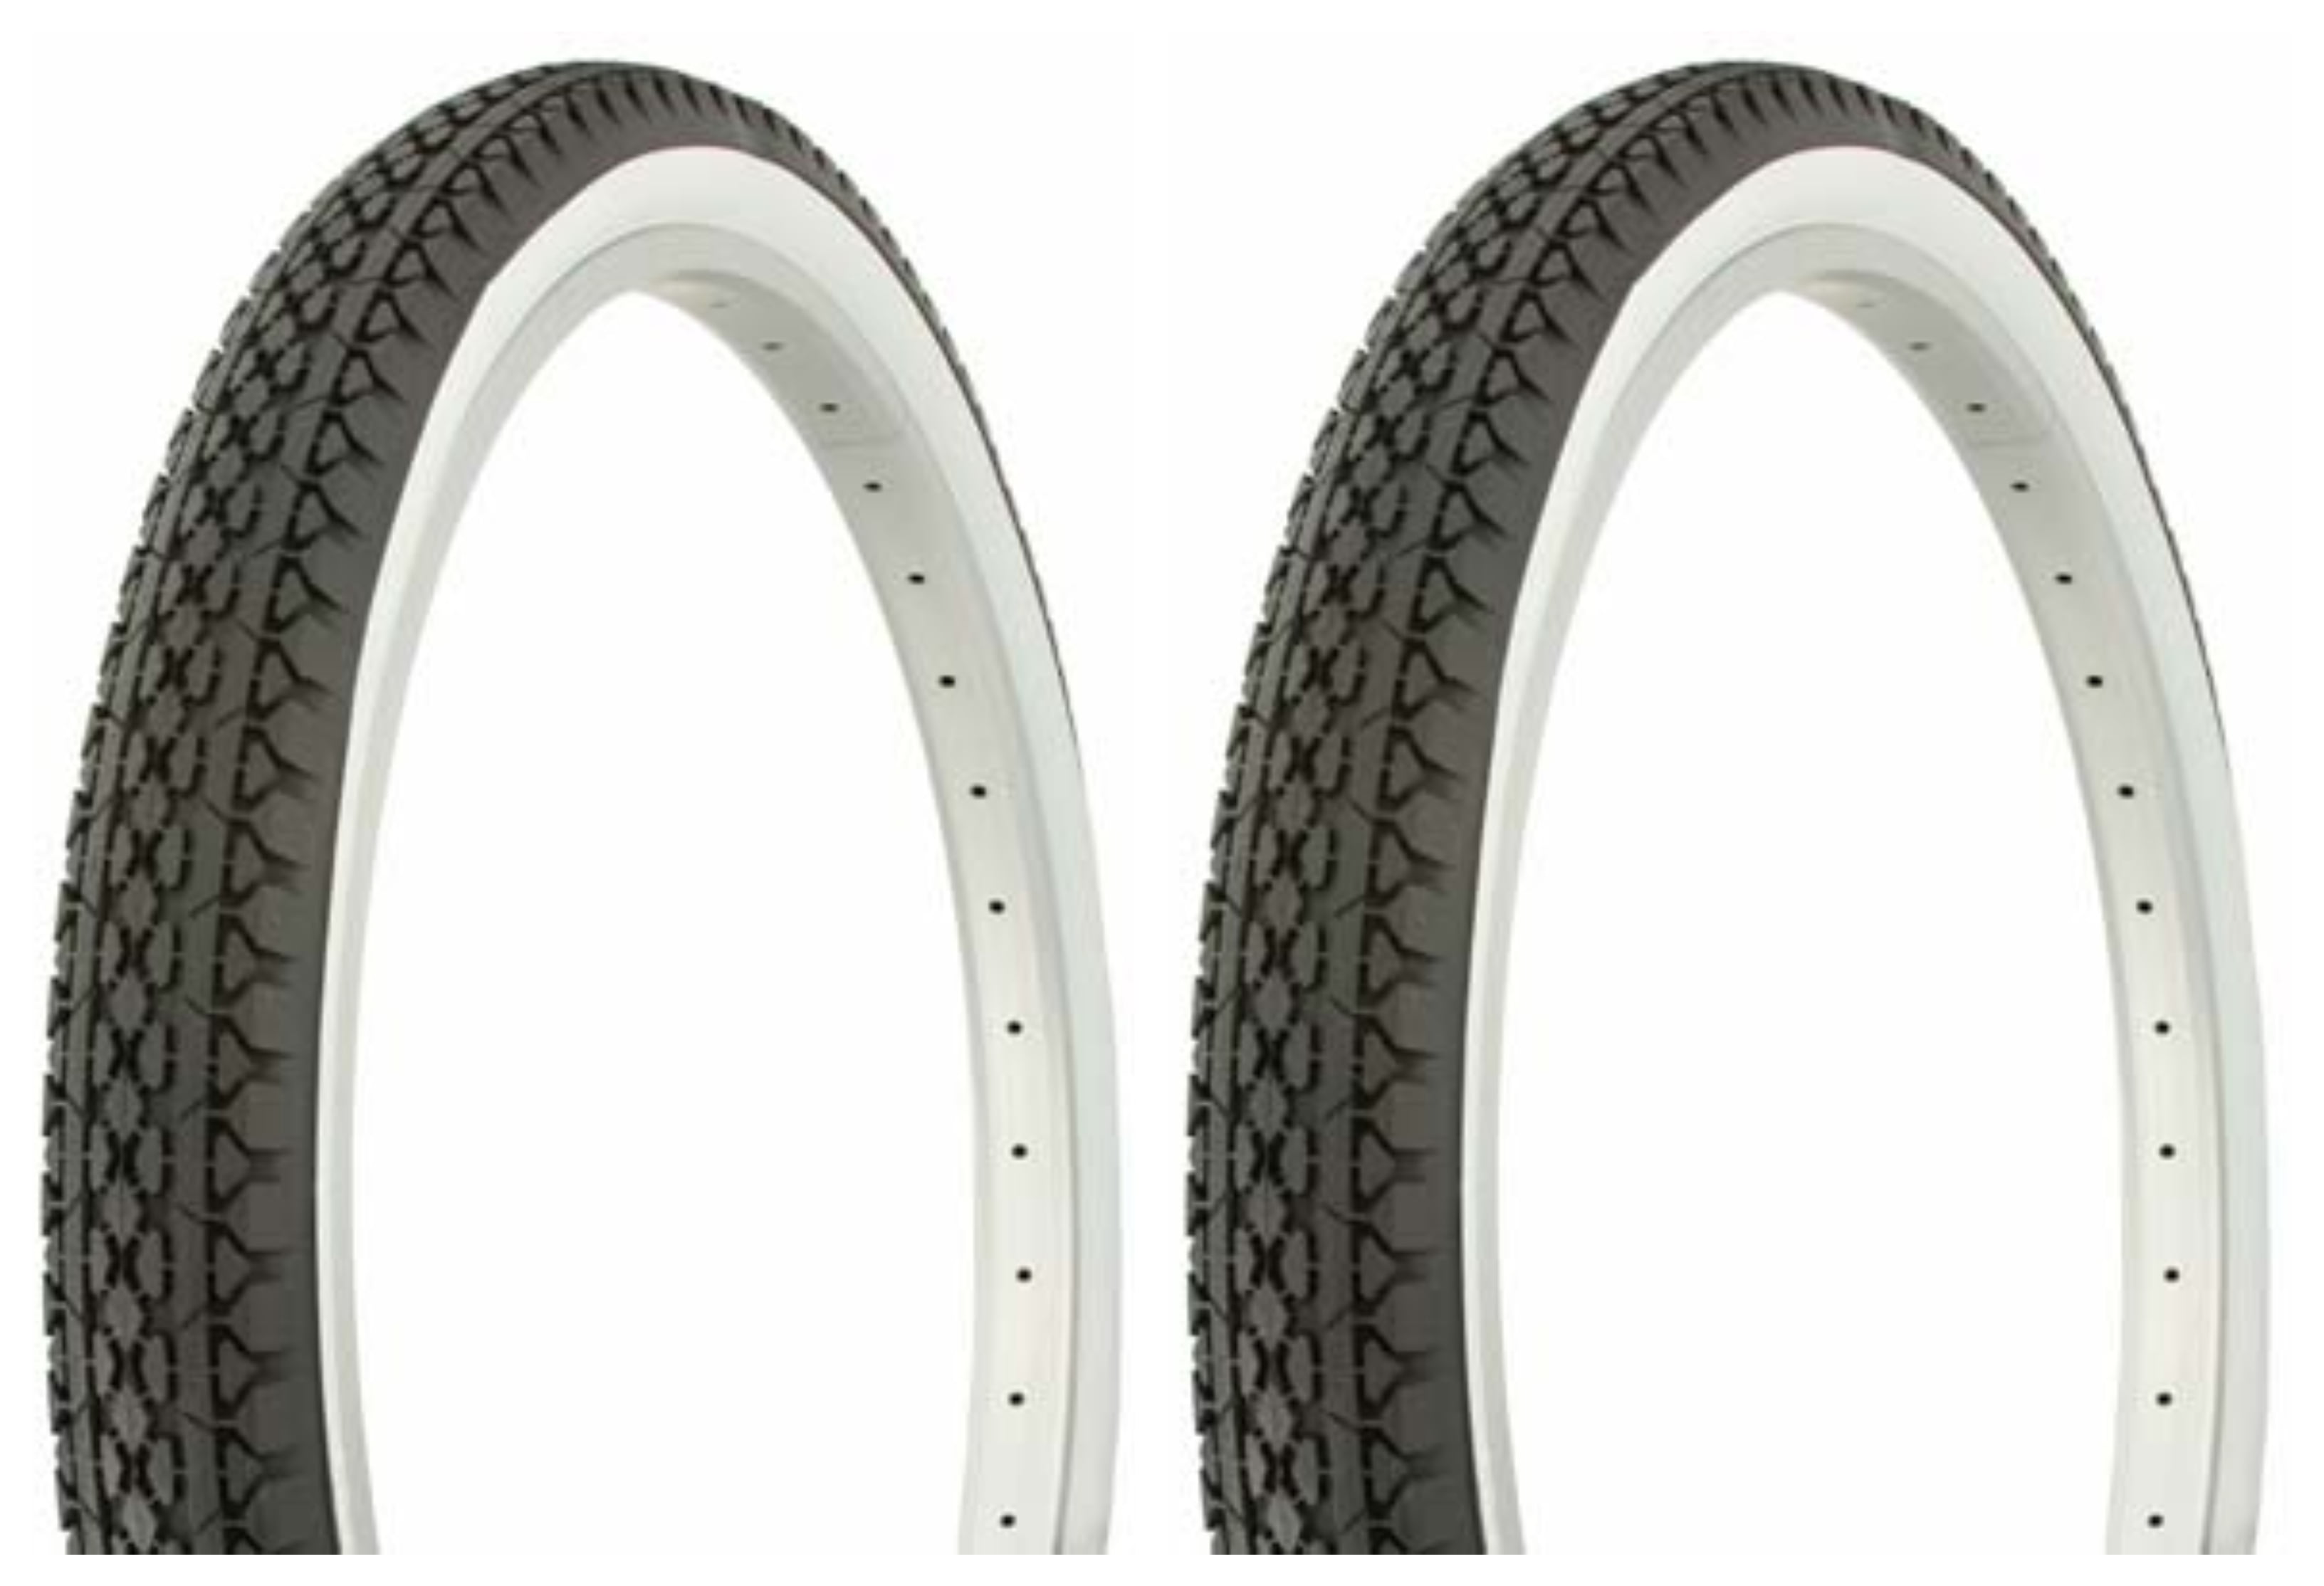 TRICYCLE 2 2 24'' X 1.75 WHITEWALL BICYCLE TIRES, TUBES & LINERS: CRUISER 